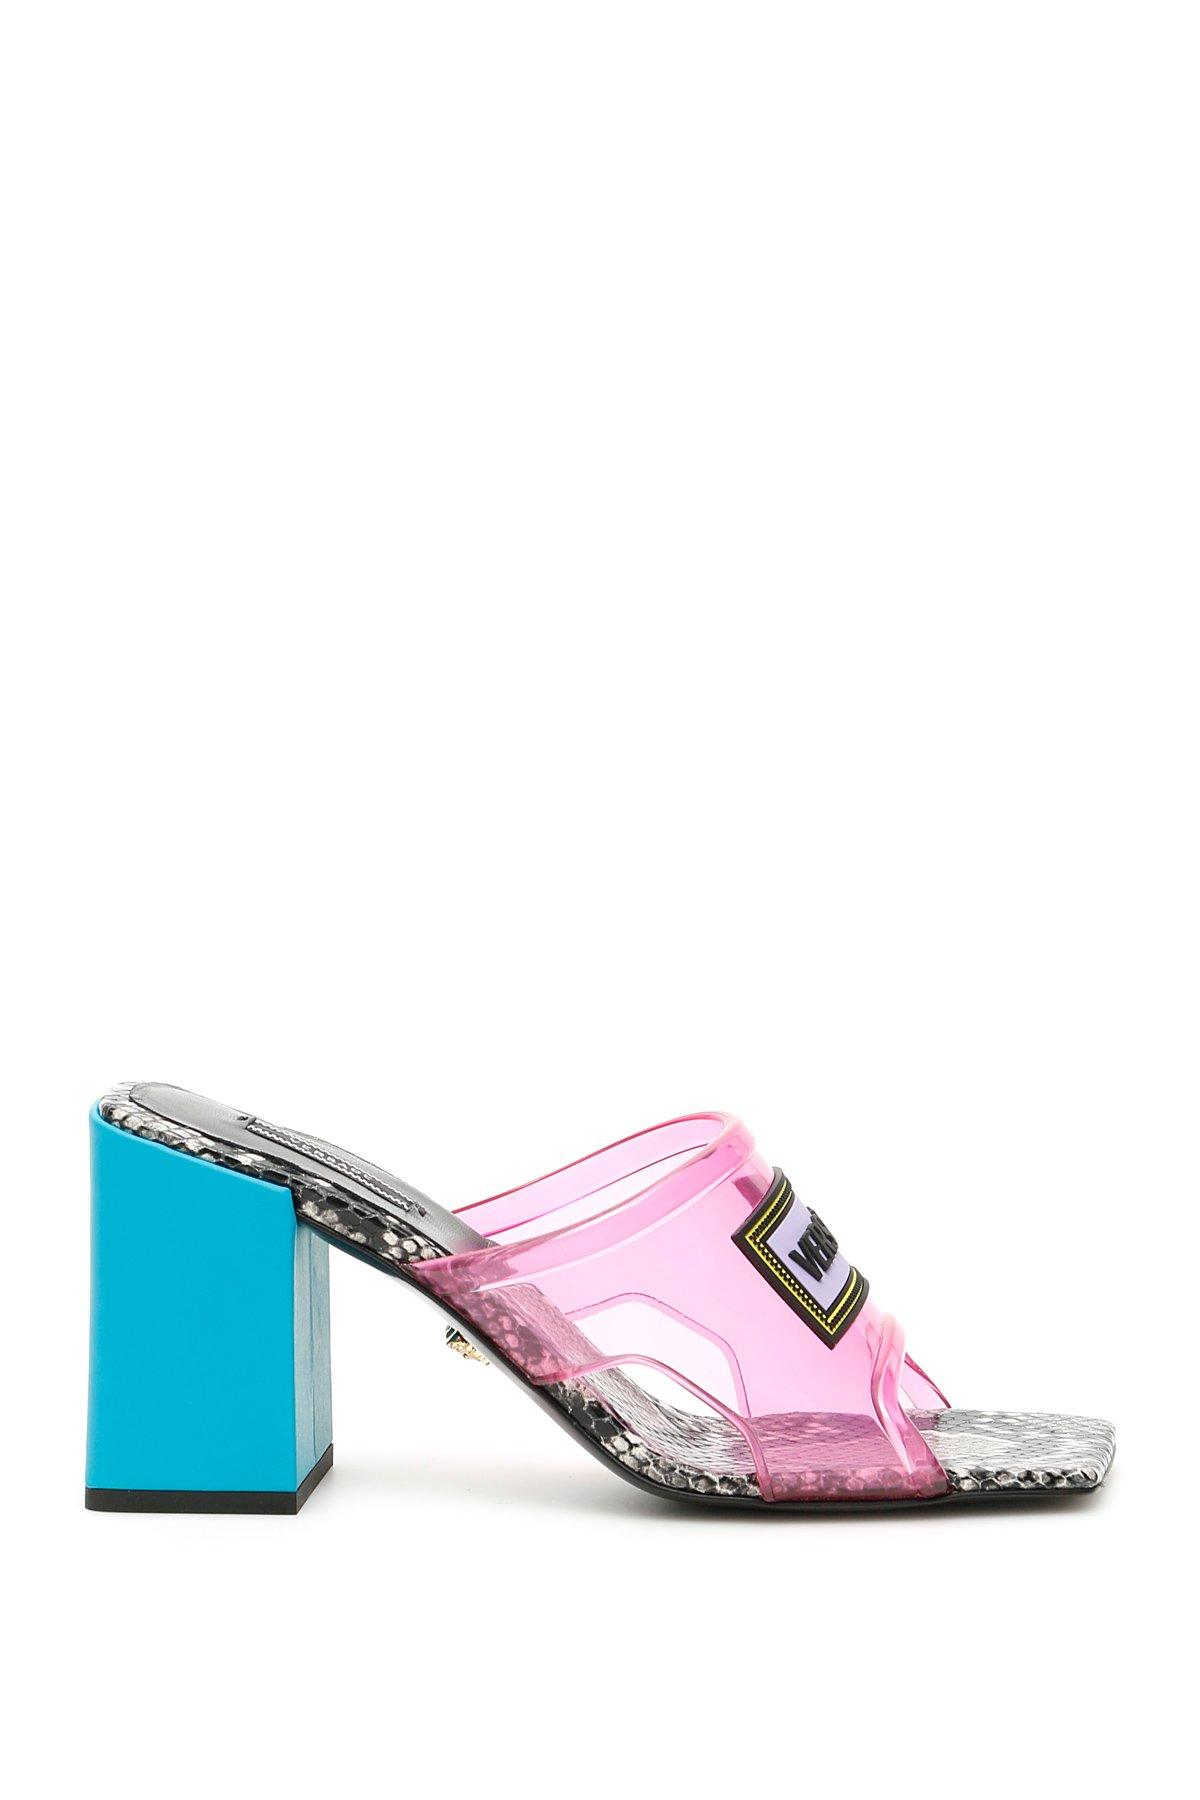 Versace 70 Pvc Snake Sandals in Pink | Lyst